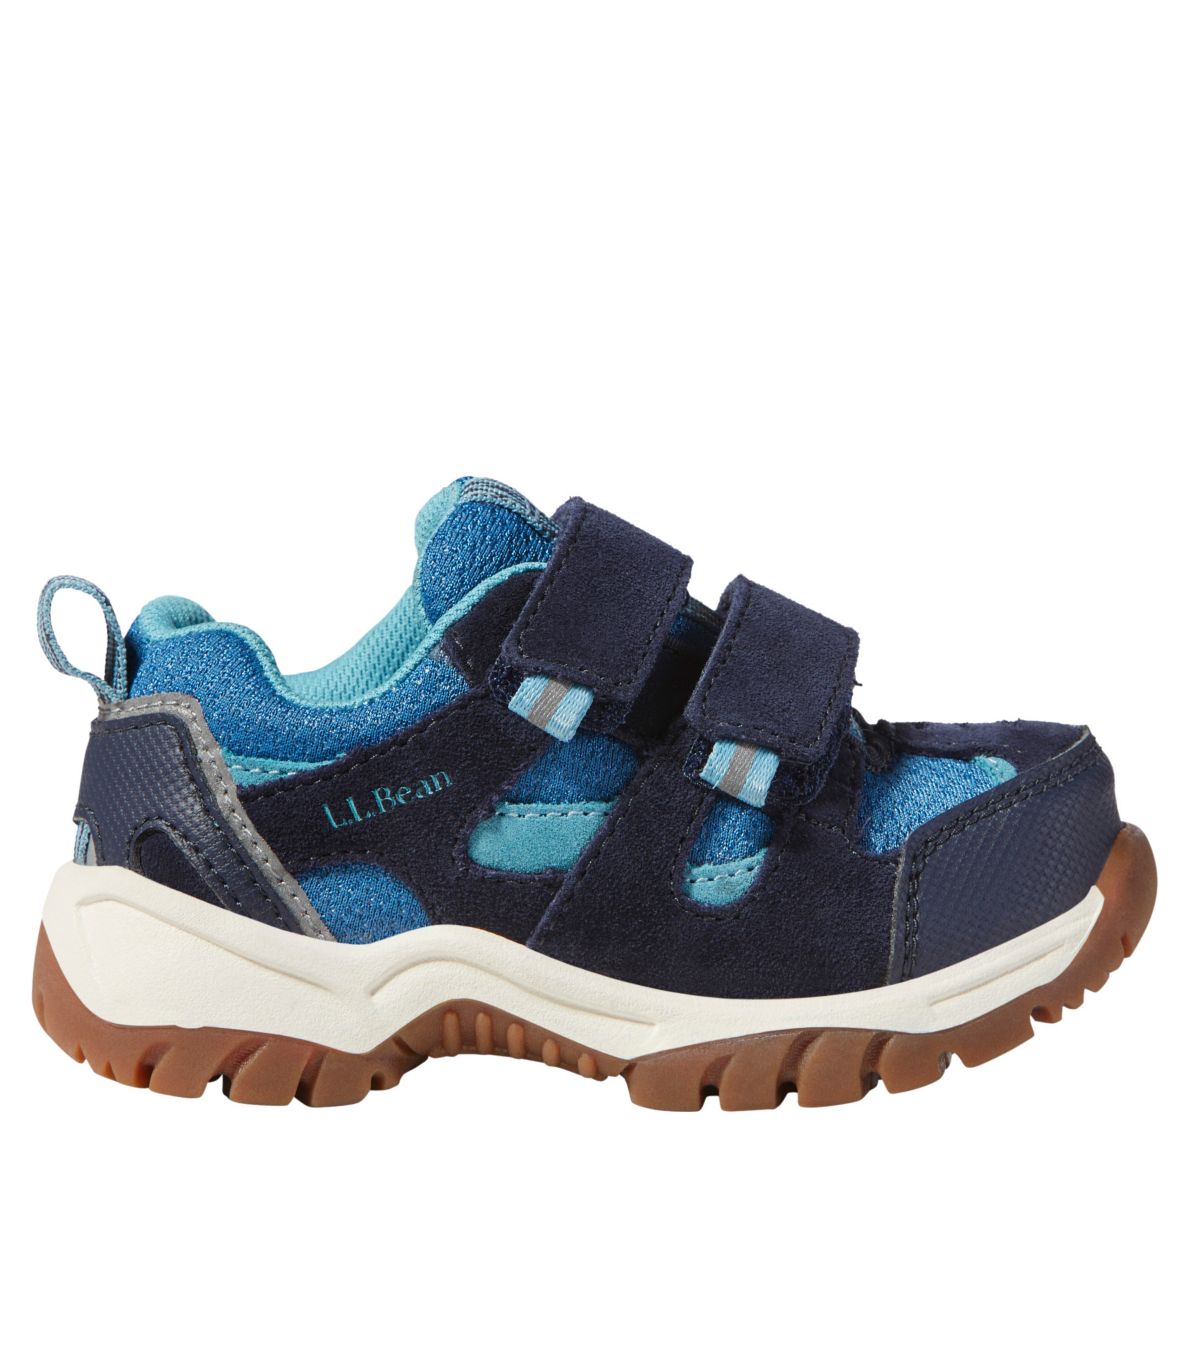 Toddlers' Trail Model Hikers, Low